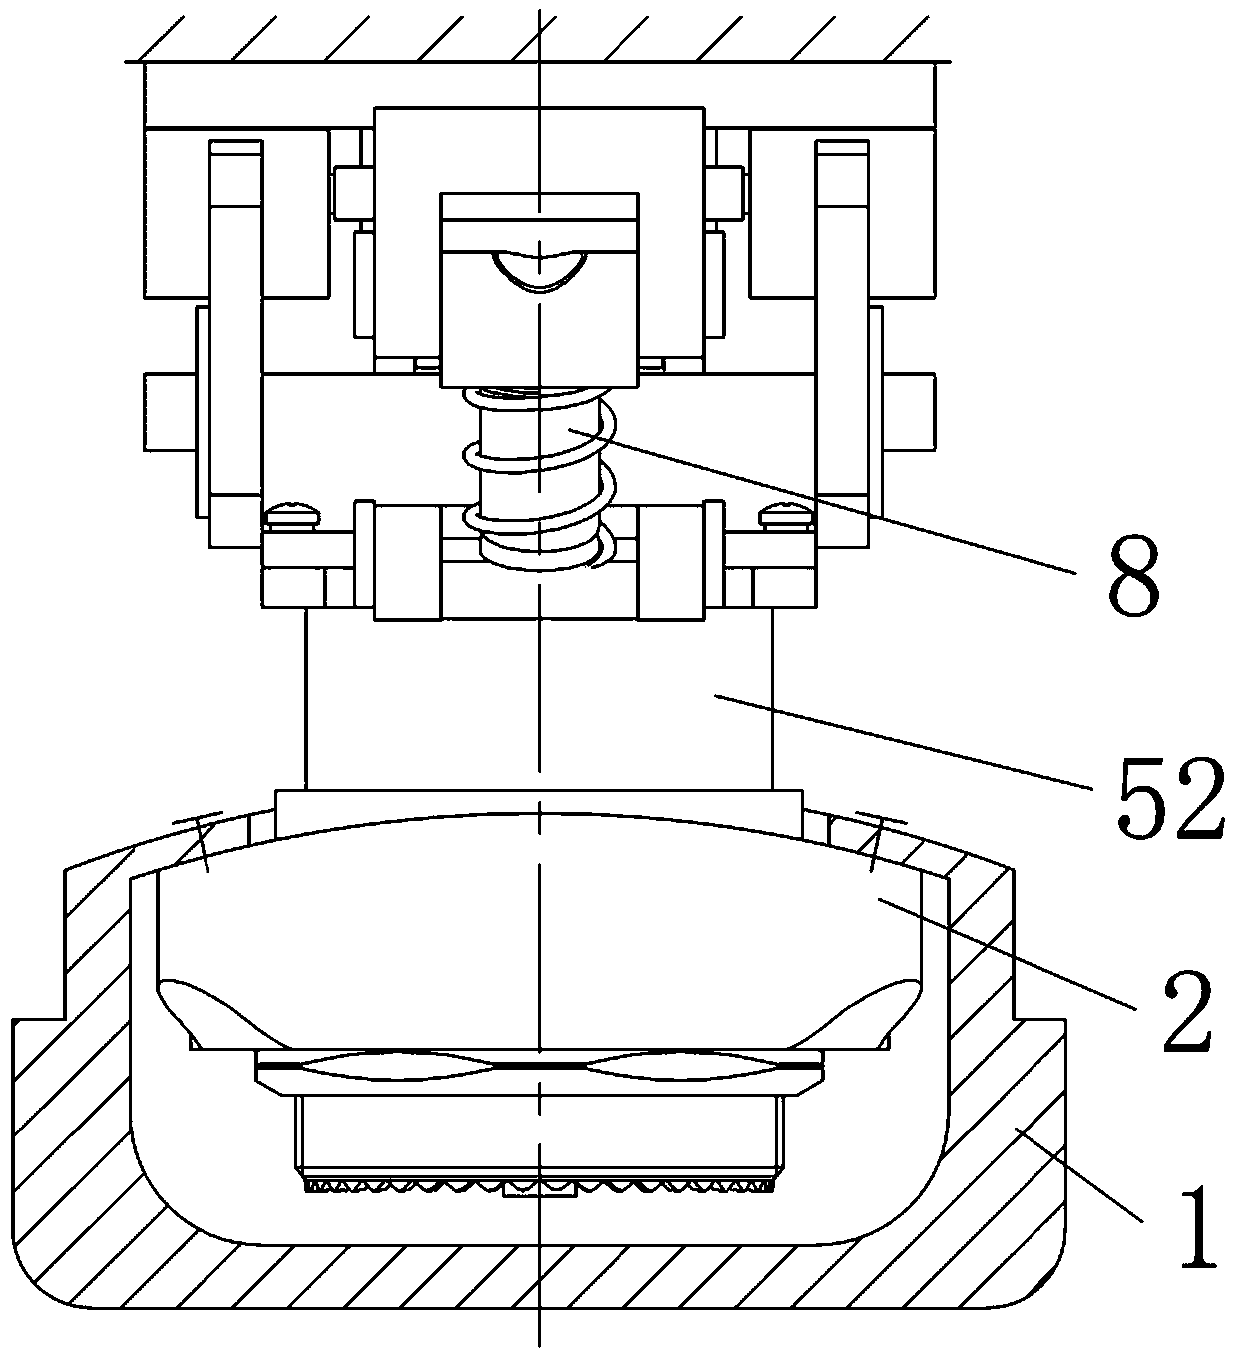 A vertical separation connector and its vertical separation mechanism